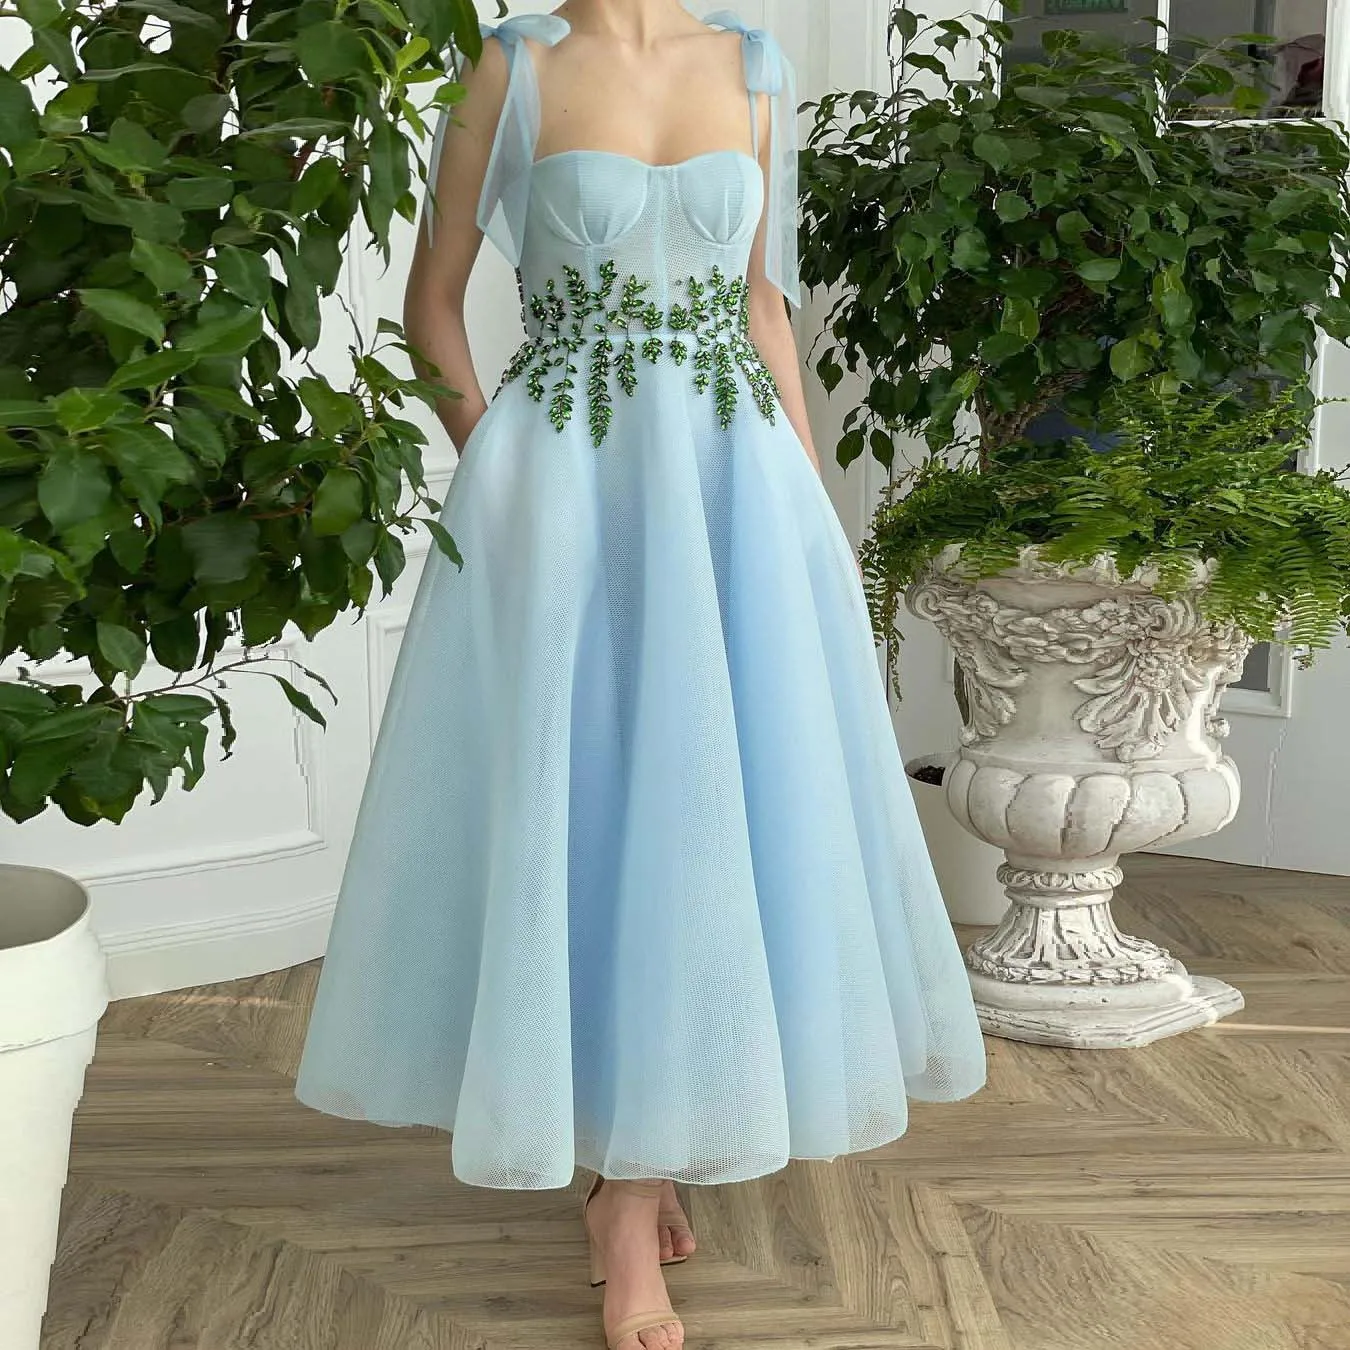 

Light Blue Elegant Homecoming Dresses Tulle A-line Sleeveless Beading Anke Length Special Occasion Prom Dress Junior Party Gowns